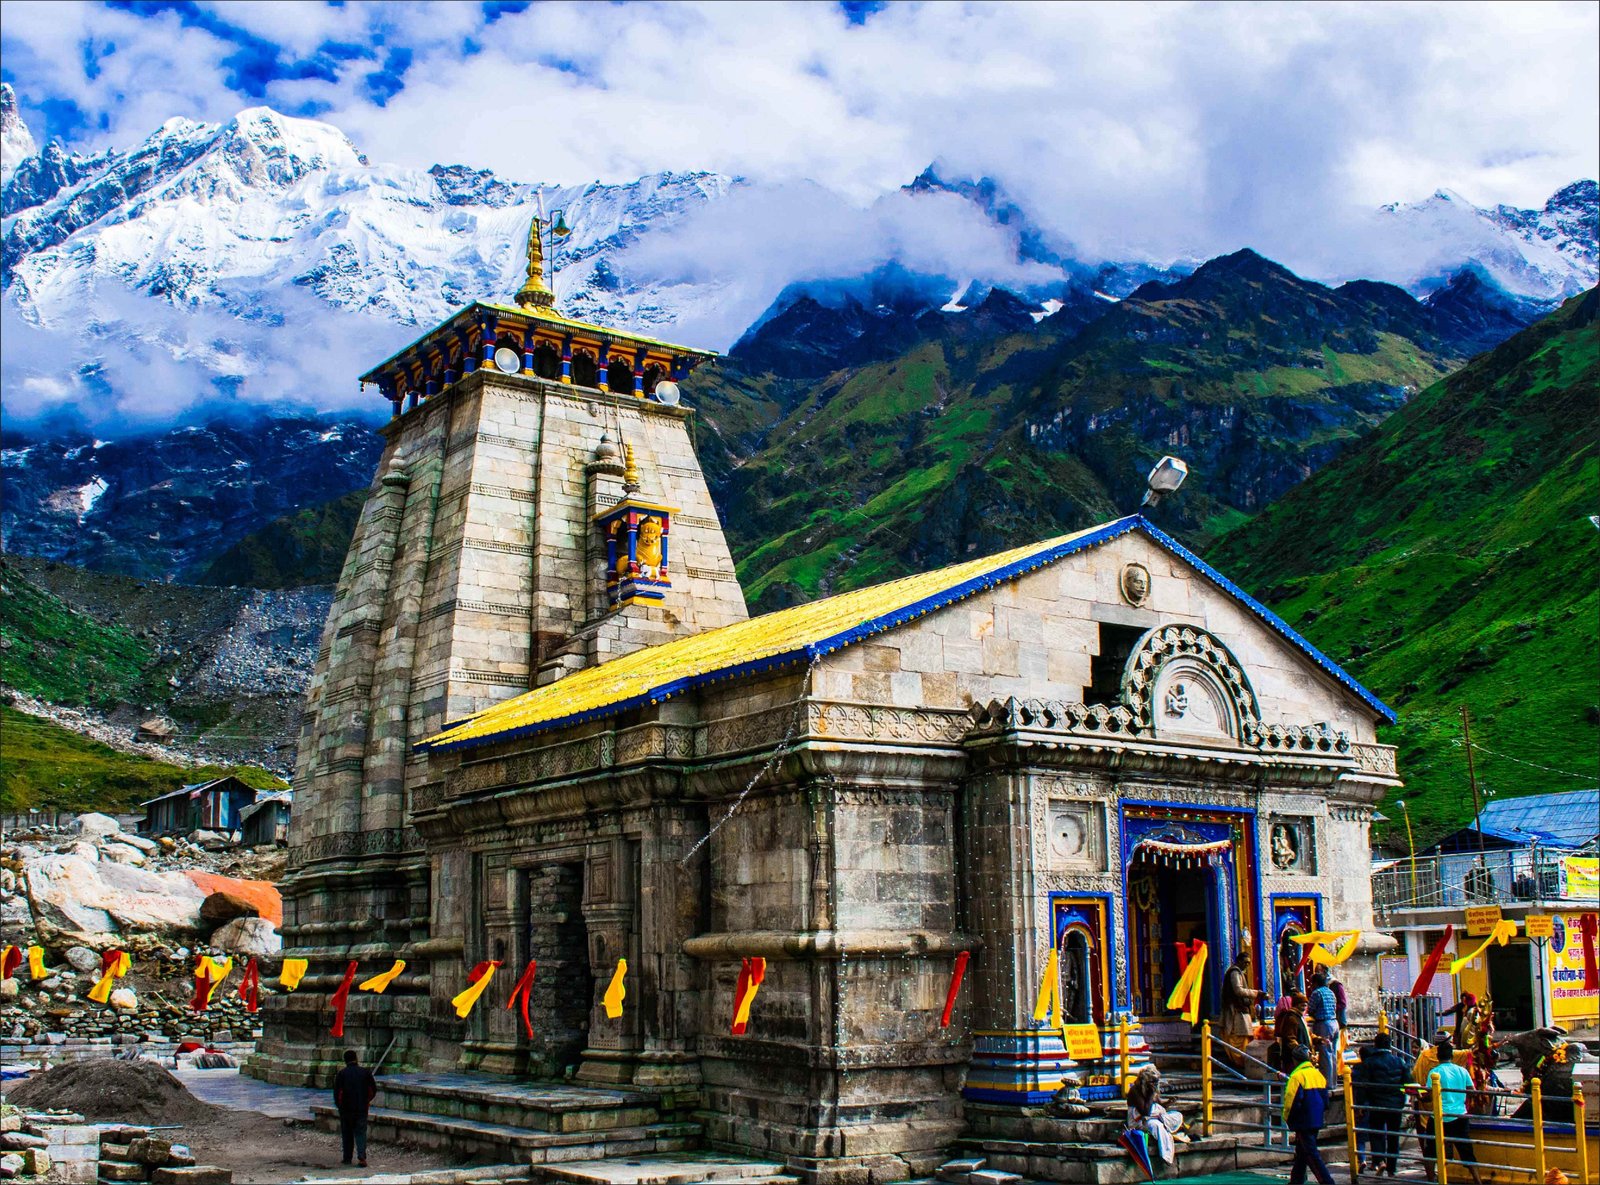 Tailored Chardham Yatra Experience - Personalized journey with The Chardham